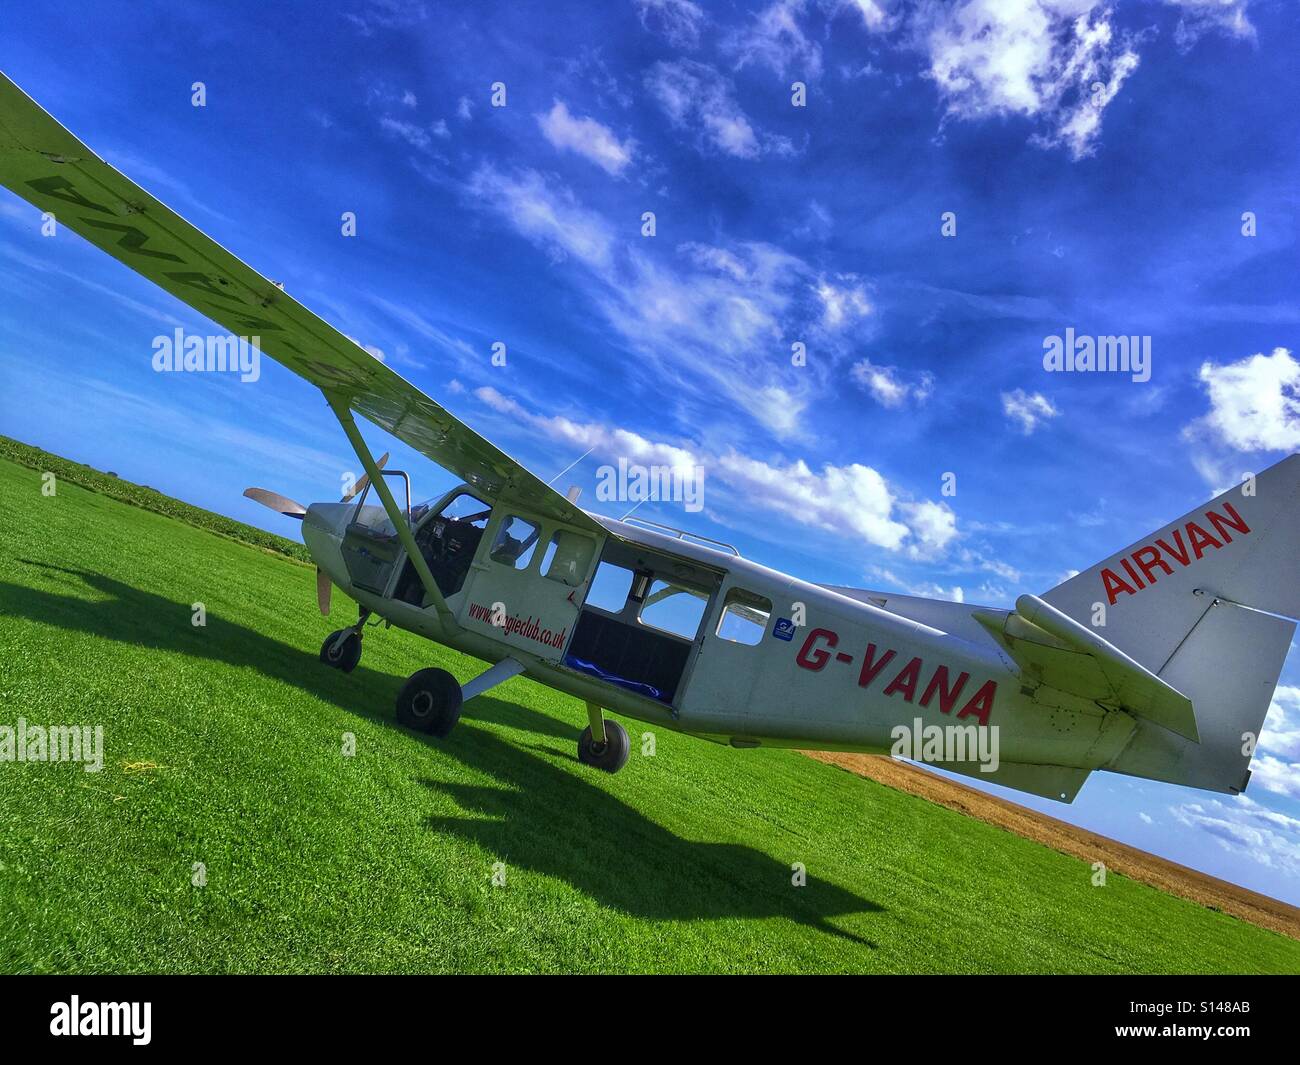 Airvan sky diving aircraft at a grass airfield Stock Photo